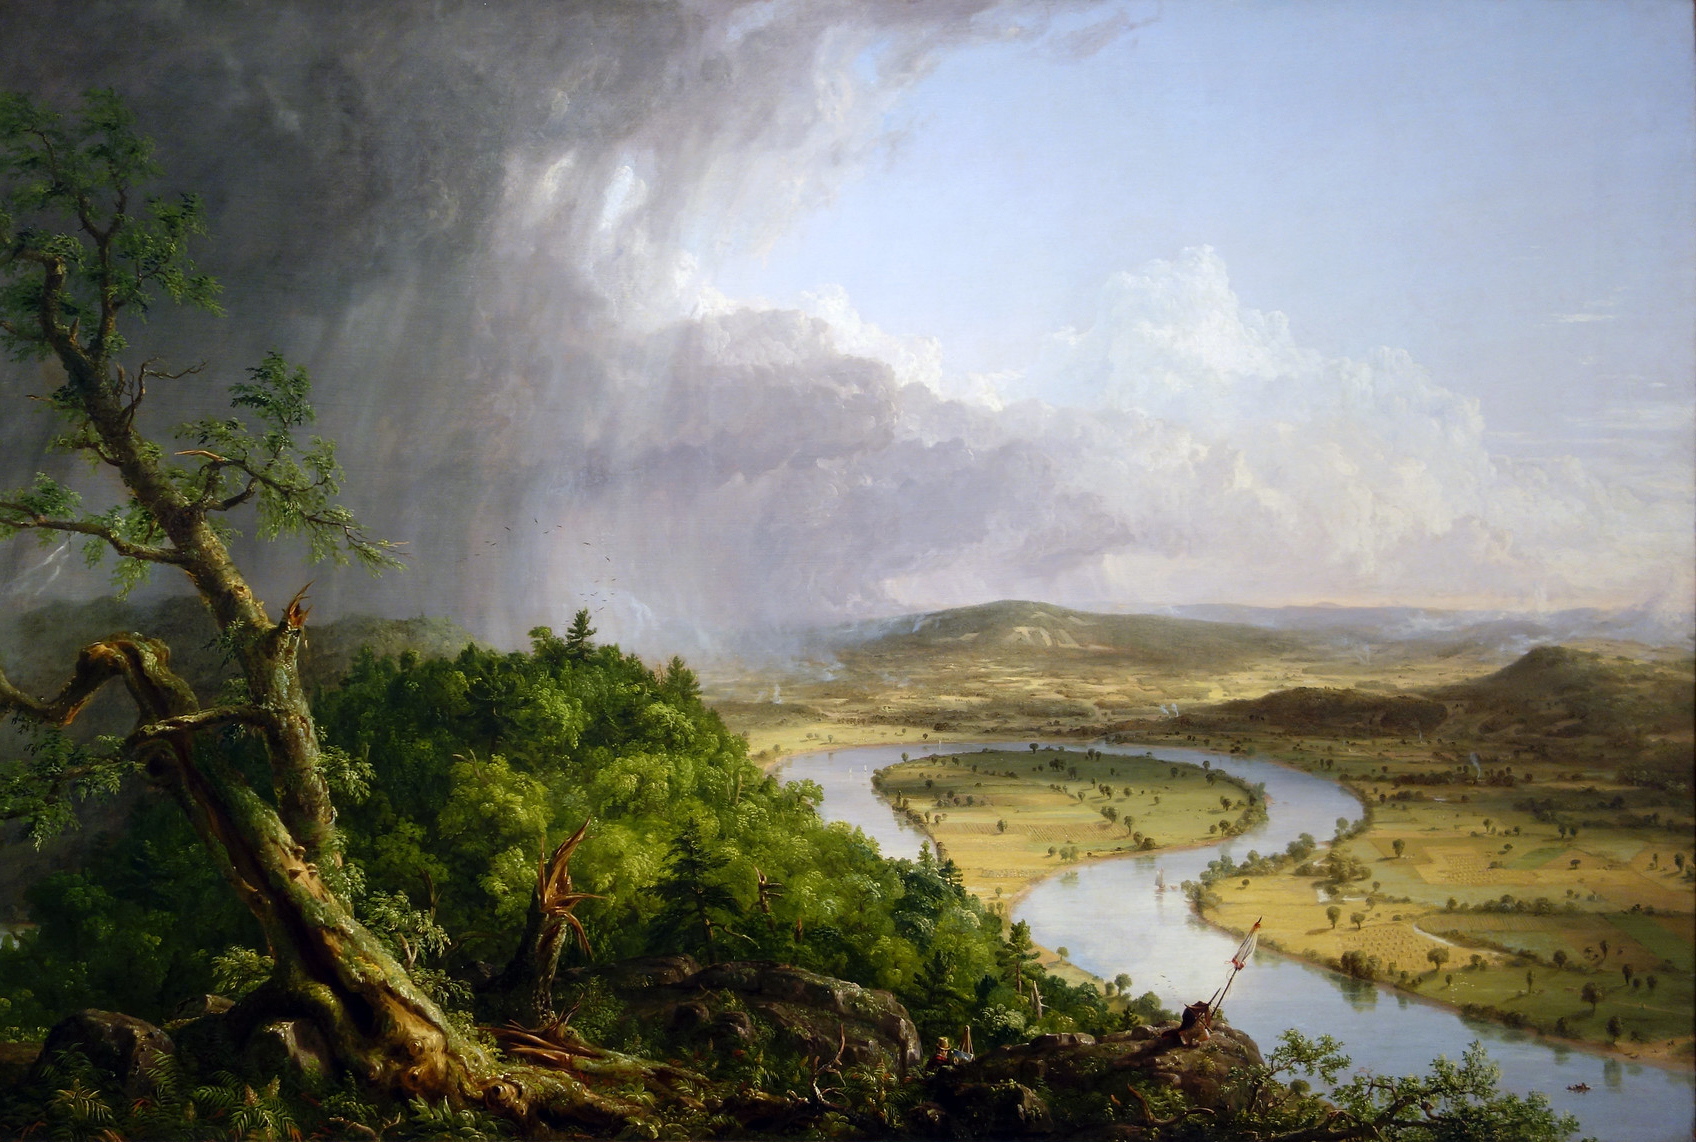 Thomas Cole, View from Mount Holyoke, Northampton, Massachusetts, after a Thunderstorm—The Oxbow, 1836, oil on canvas, 130.8 x 193 cm (The Metropolitan Museum of Art, photo: Steven Zucker, CC BY-NC-SA 2.0)